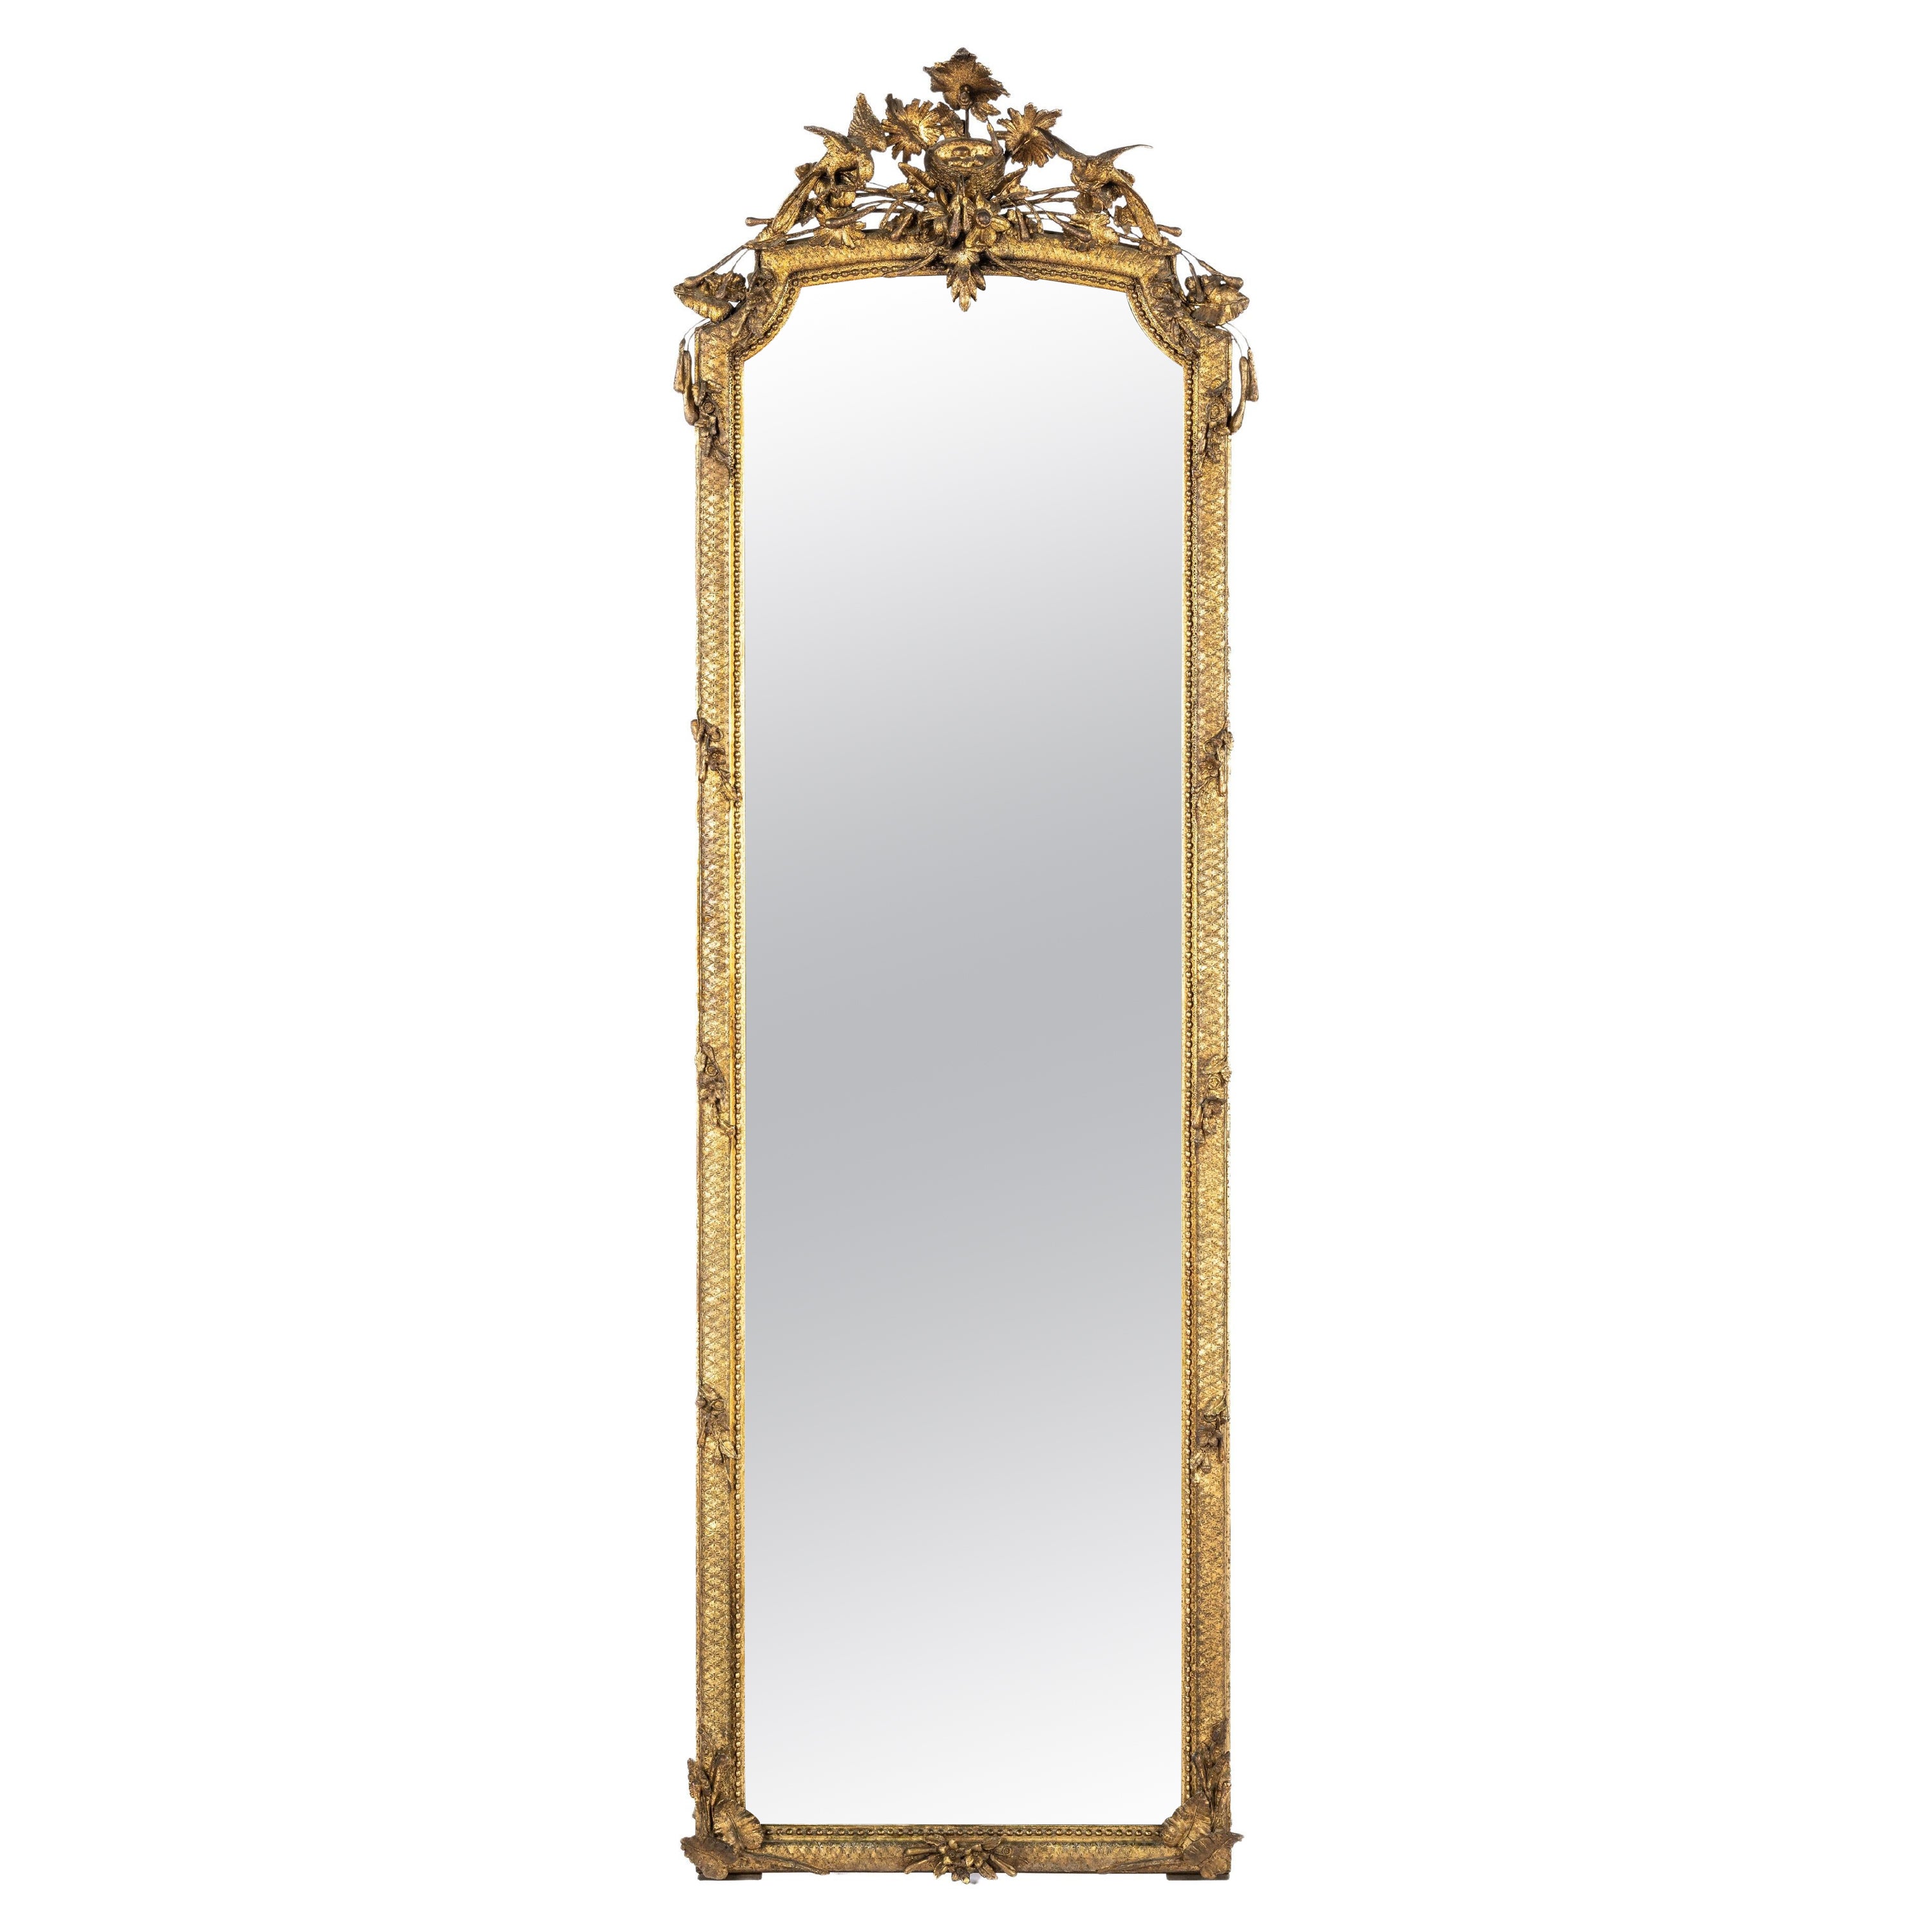 Antique 19th century Louis XVI gold leaf gilt French Pier mirror with crest For Sale